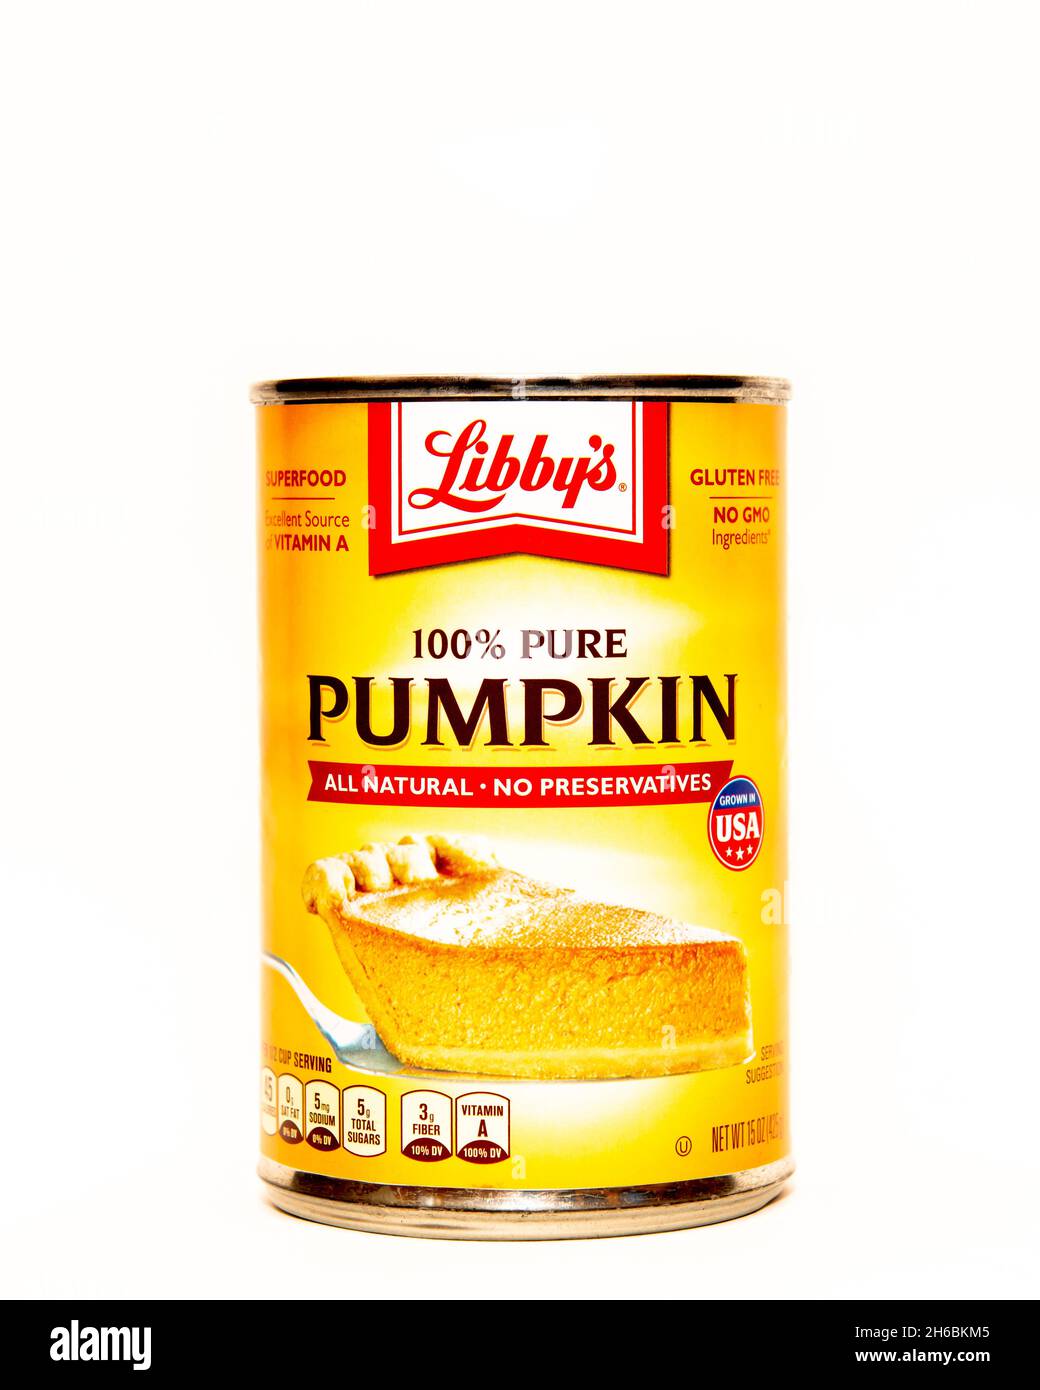 A can of Libby's 100% pure pumpkin, a gluten free superfood that's all natural with no preservatives. Stock Photo